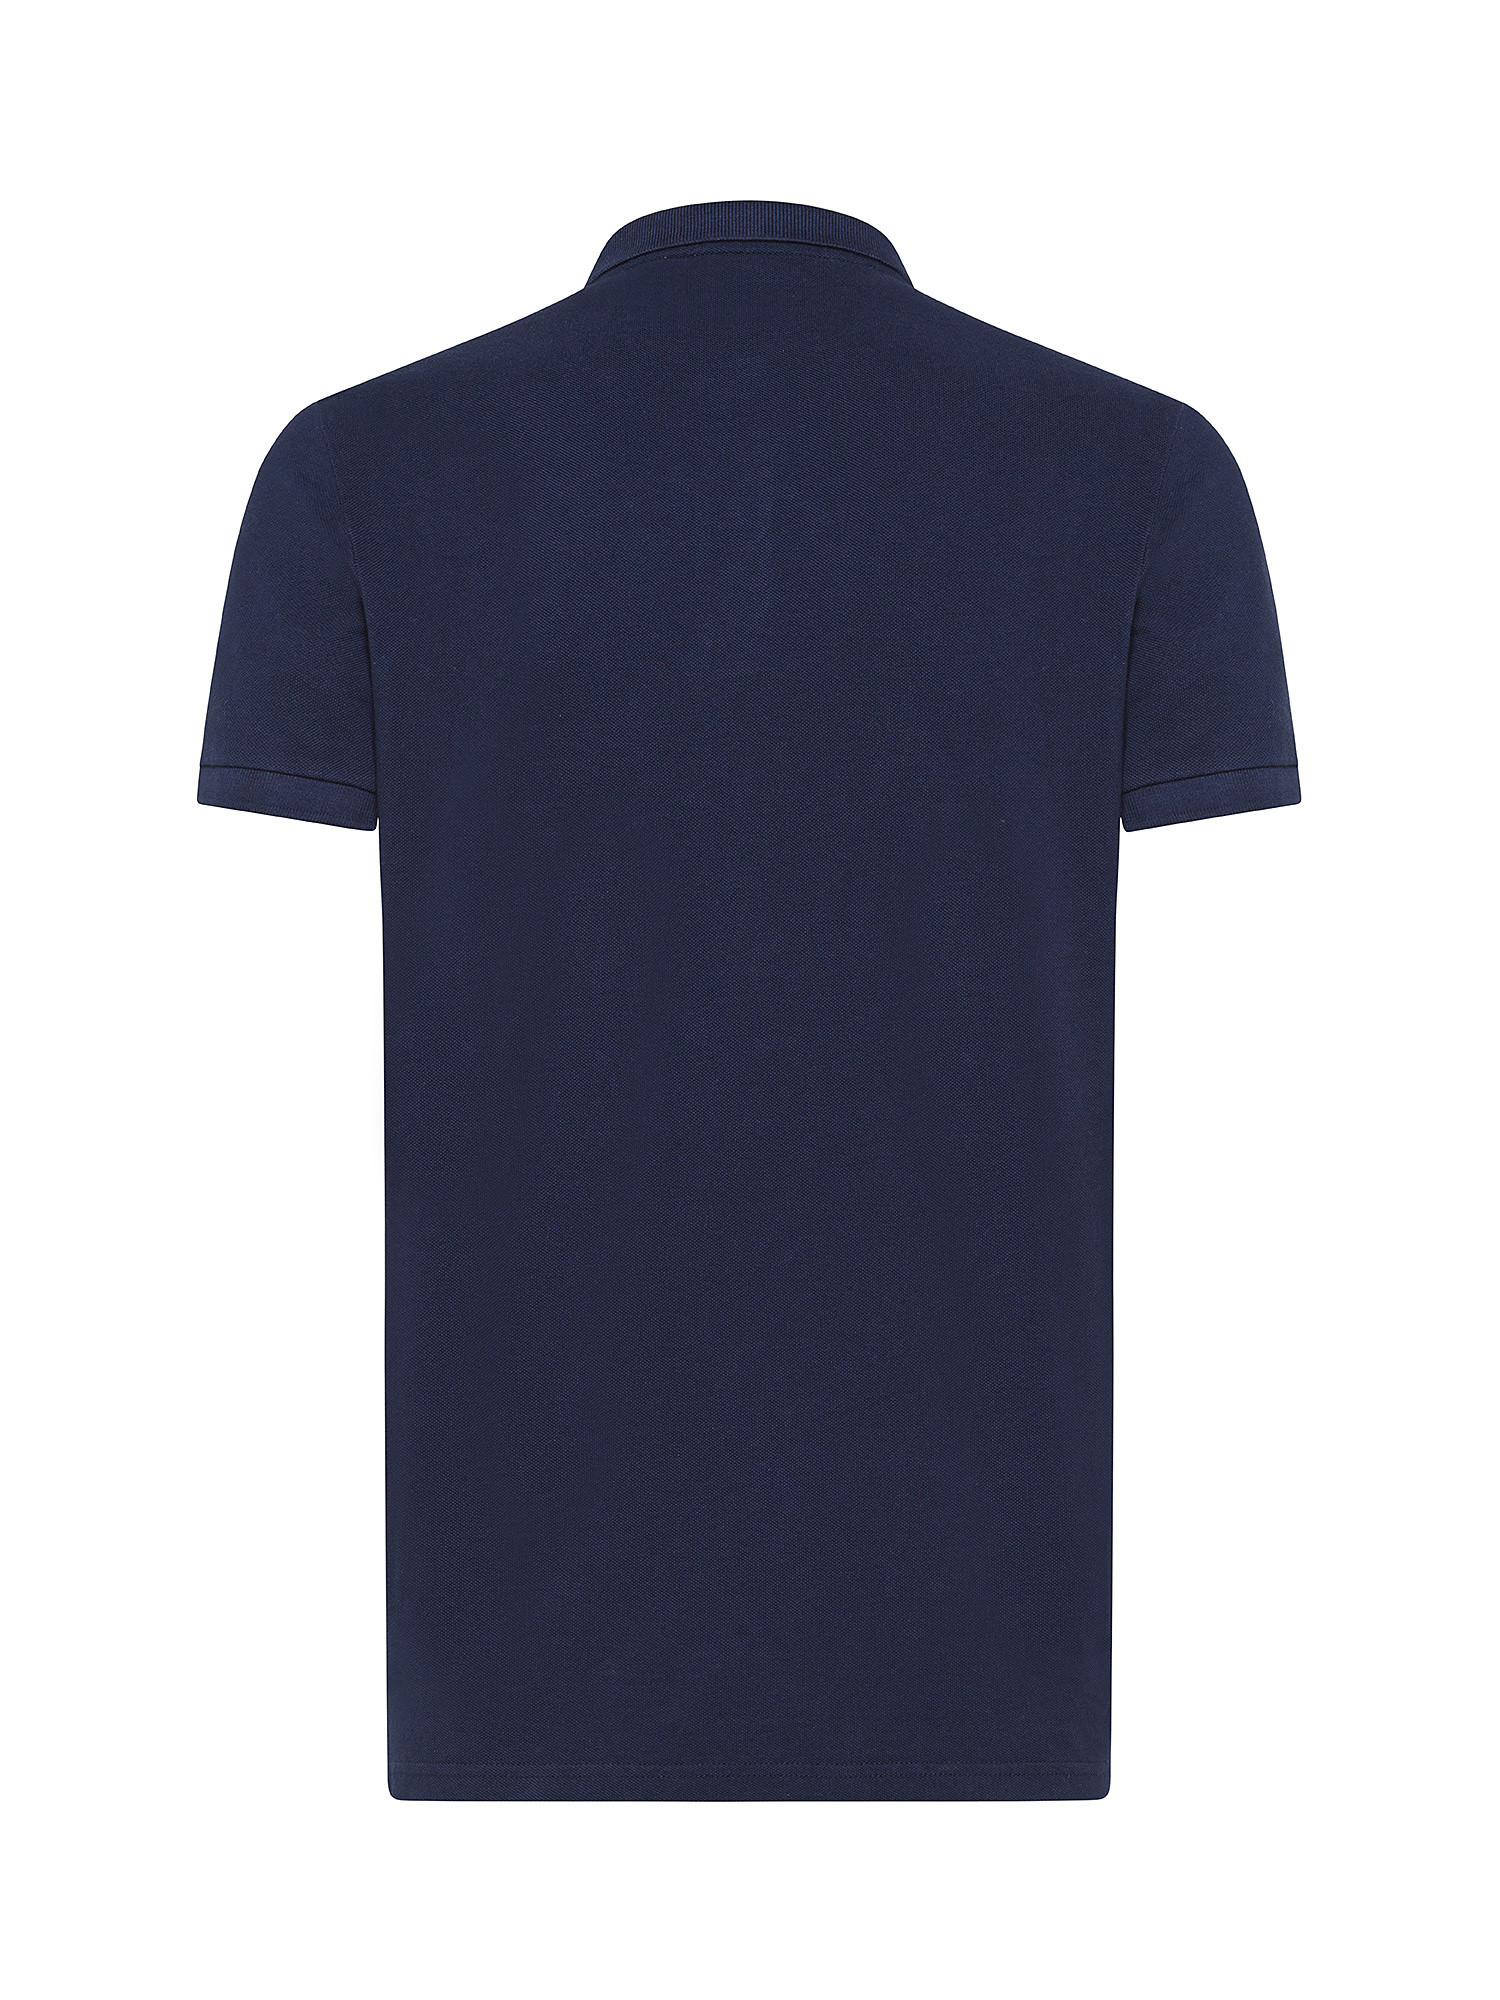 Superdry - Cotton piqué polo shirt with logo, Blue, large image number 1